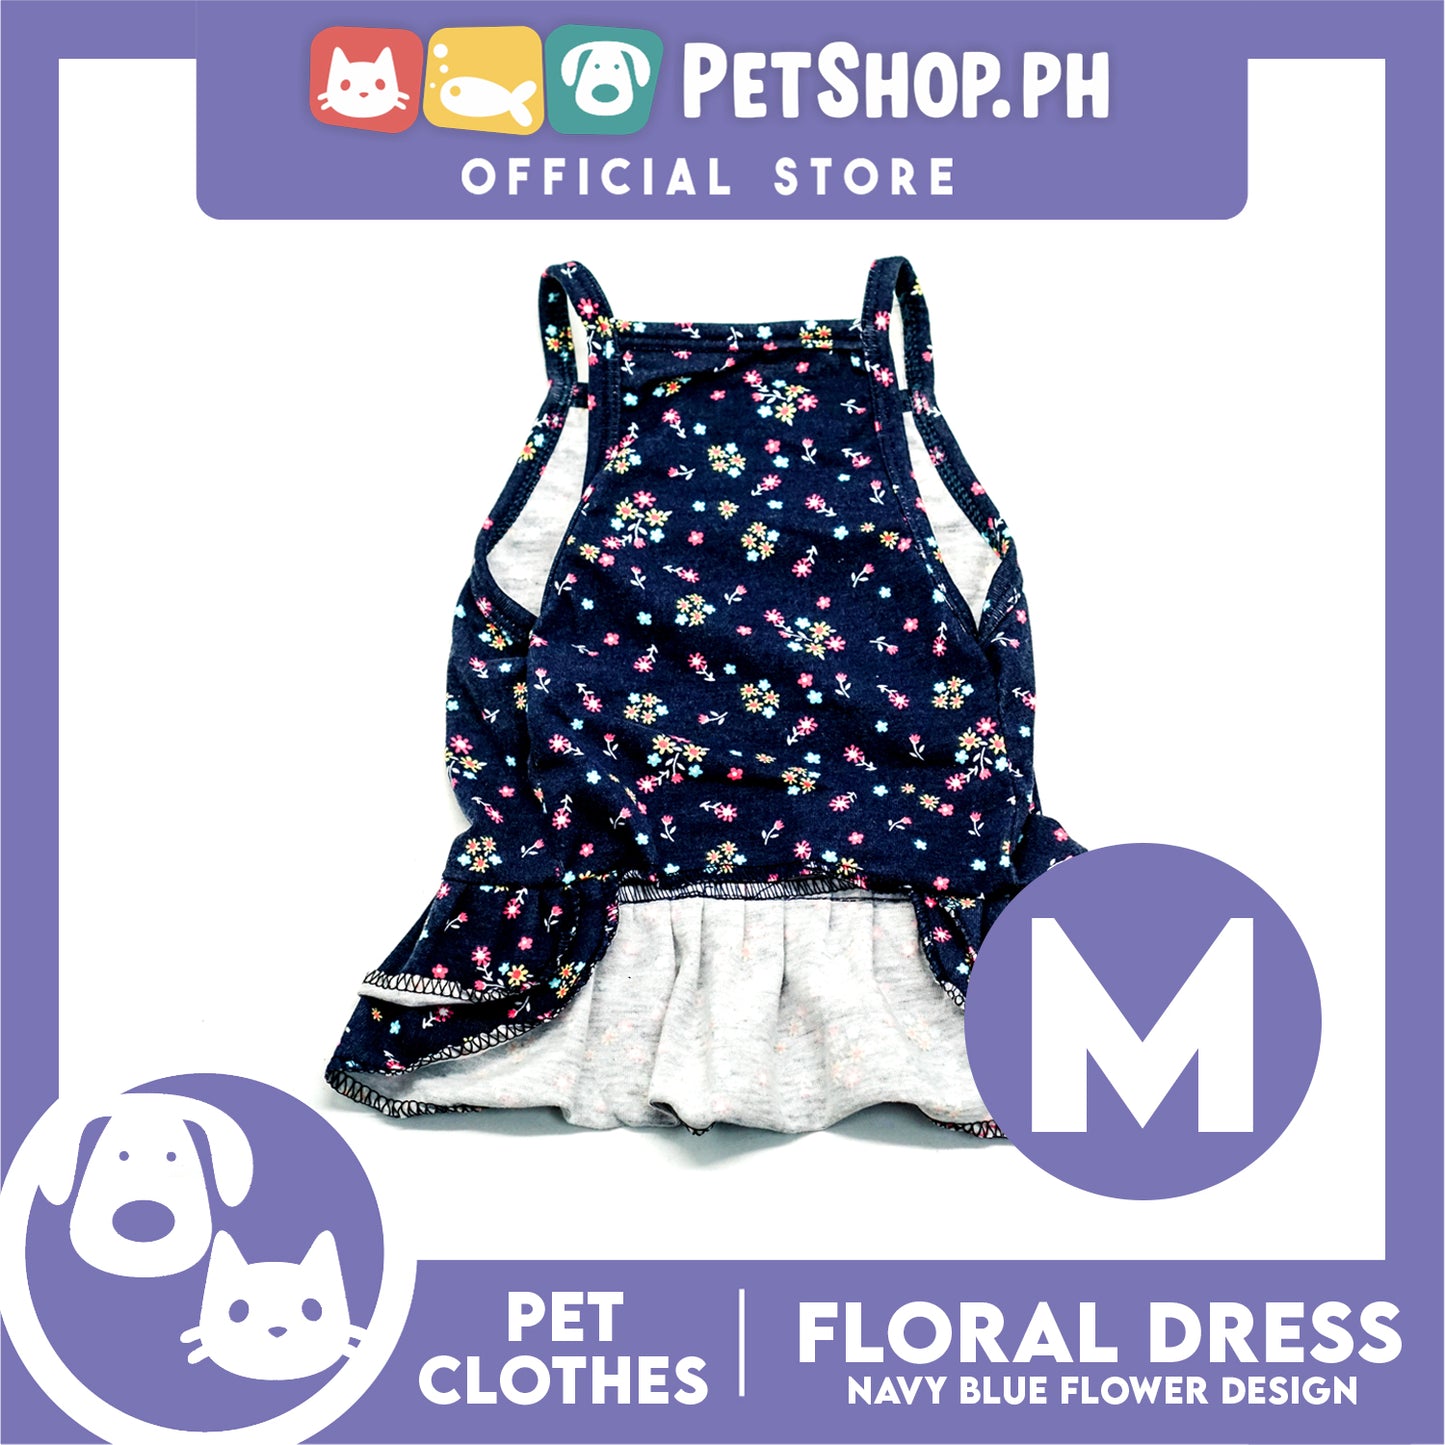 Pet Dress Navy Blue Floral Dreess (Medium) Perfect Fit for Dogs and Cats